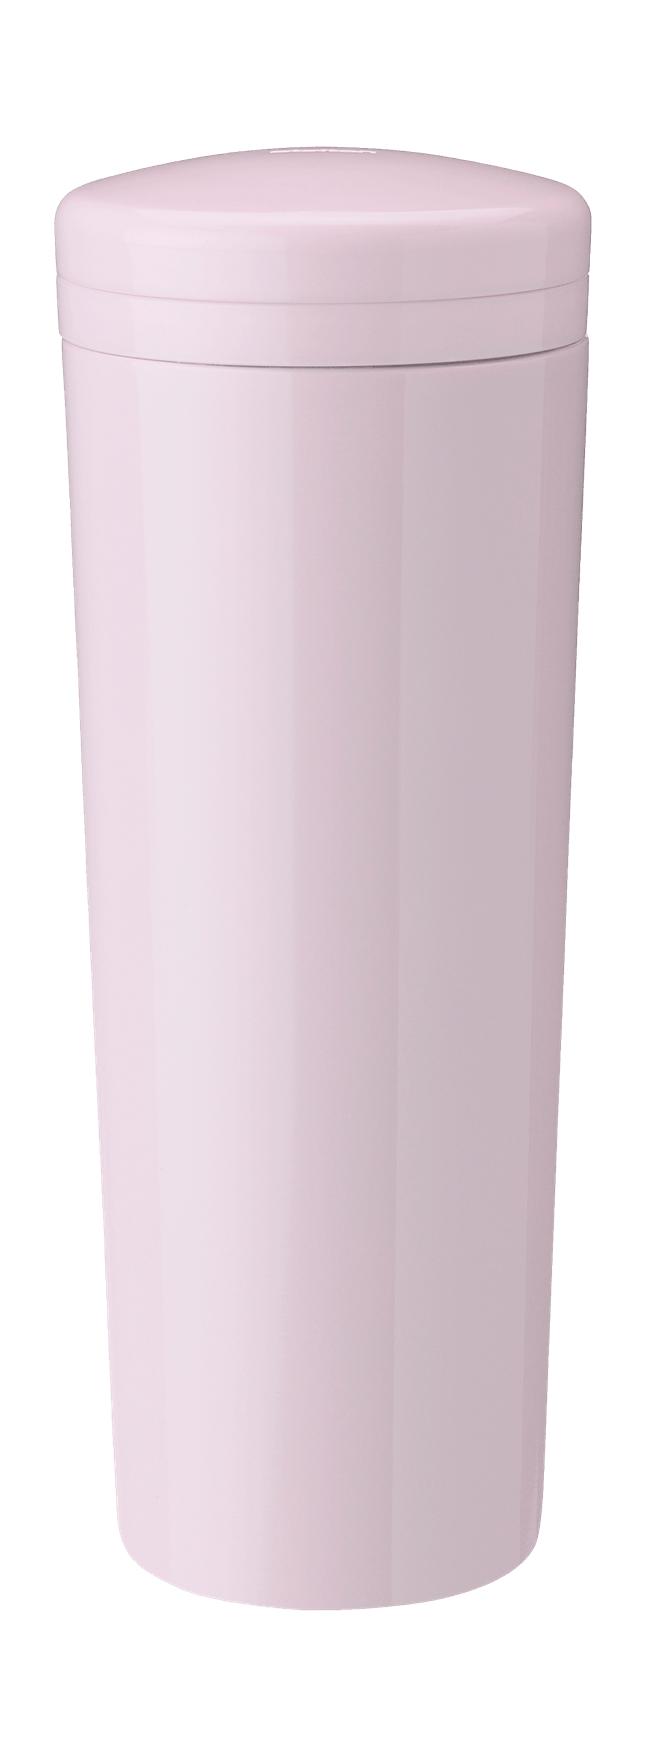 Stelton Carrie Thermosfles 0,5 L, Rose